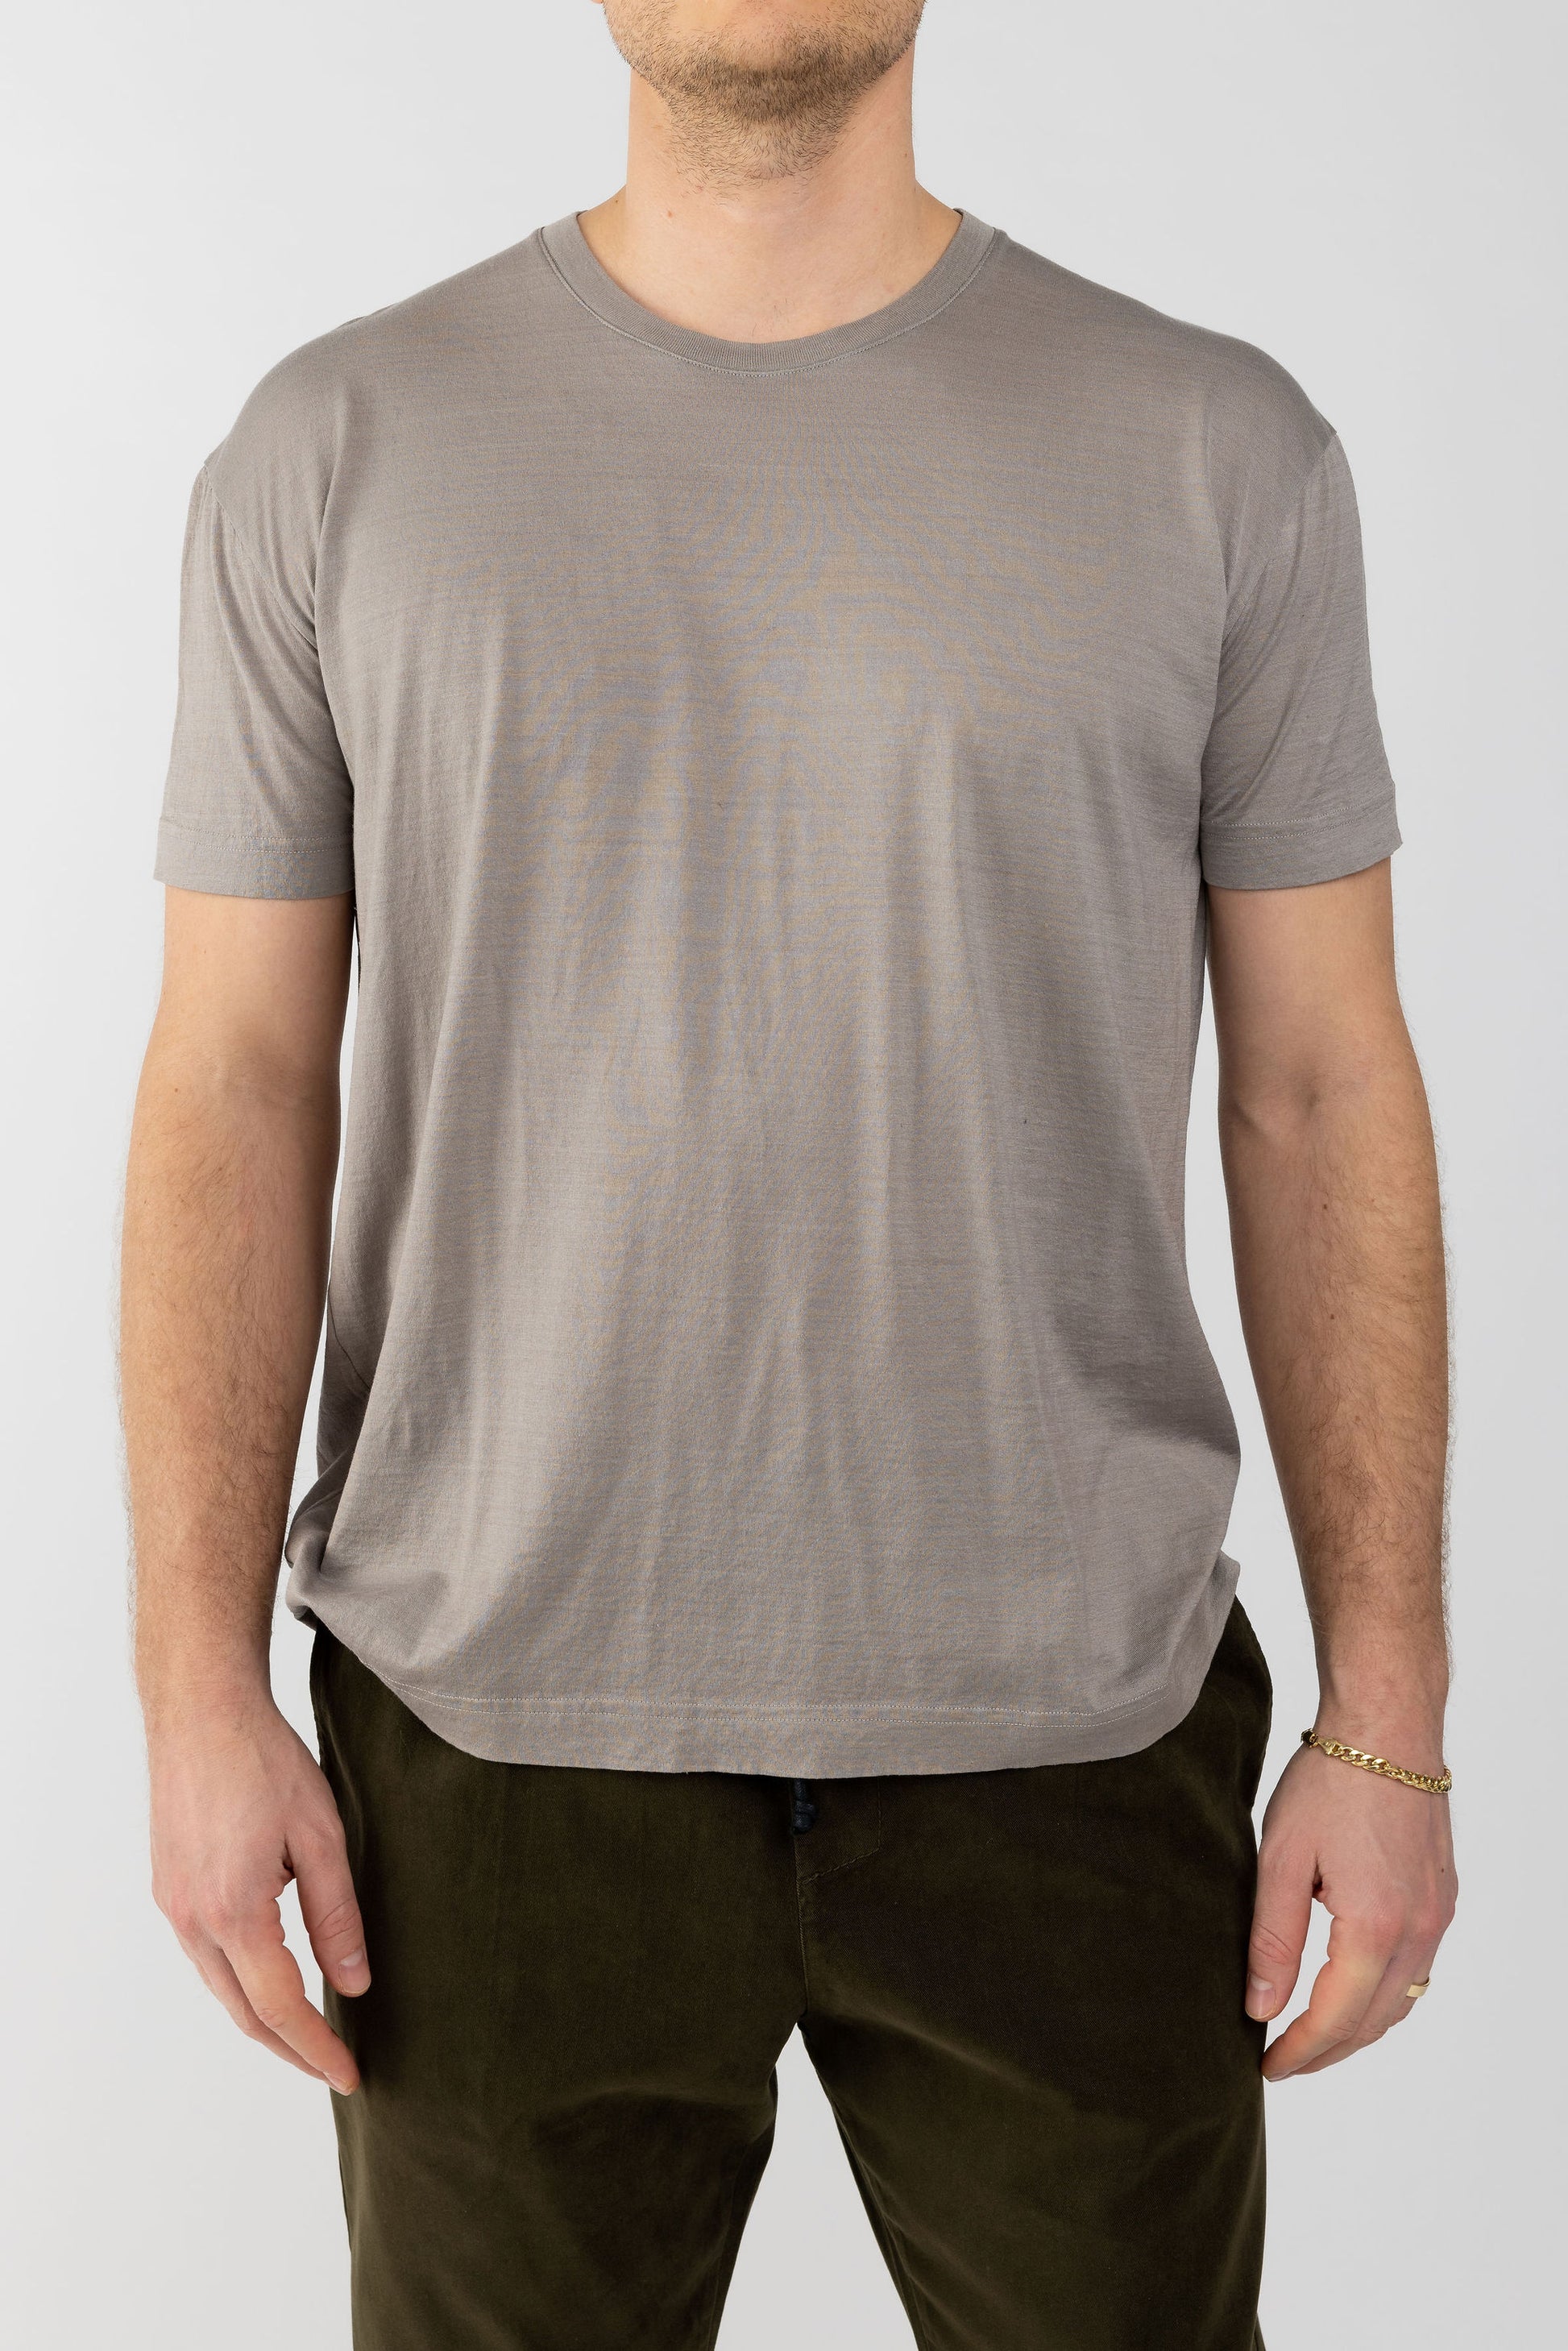 PRIVATE 0204 Cotton T-Shirt in Greige